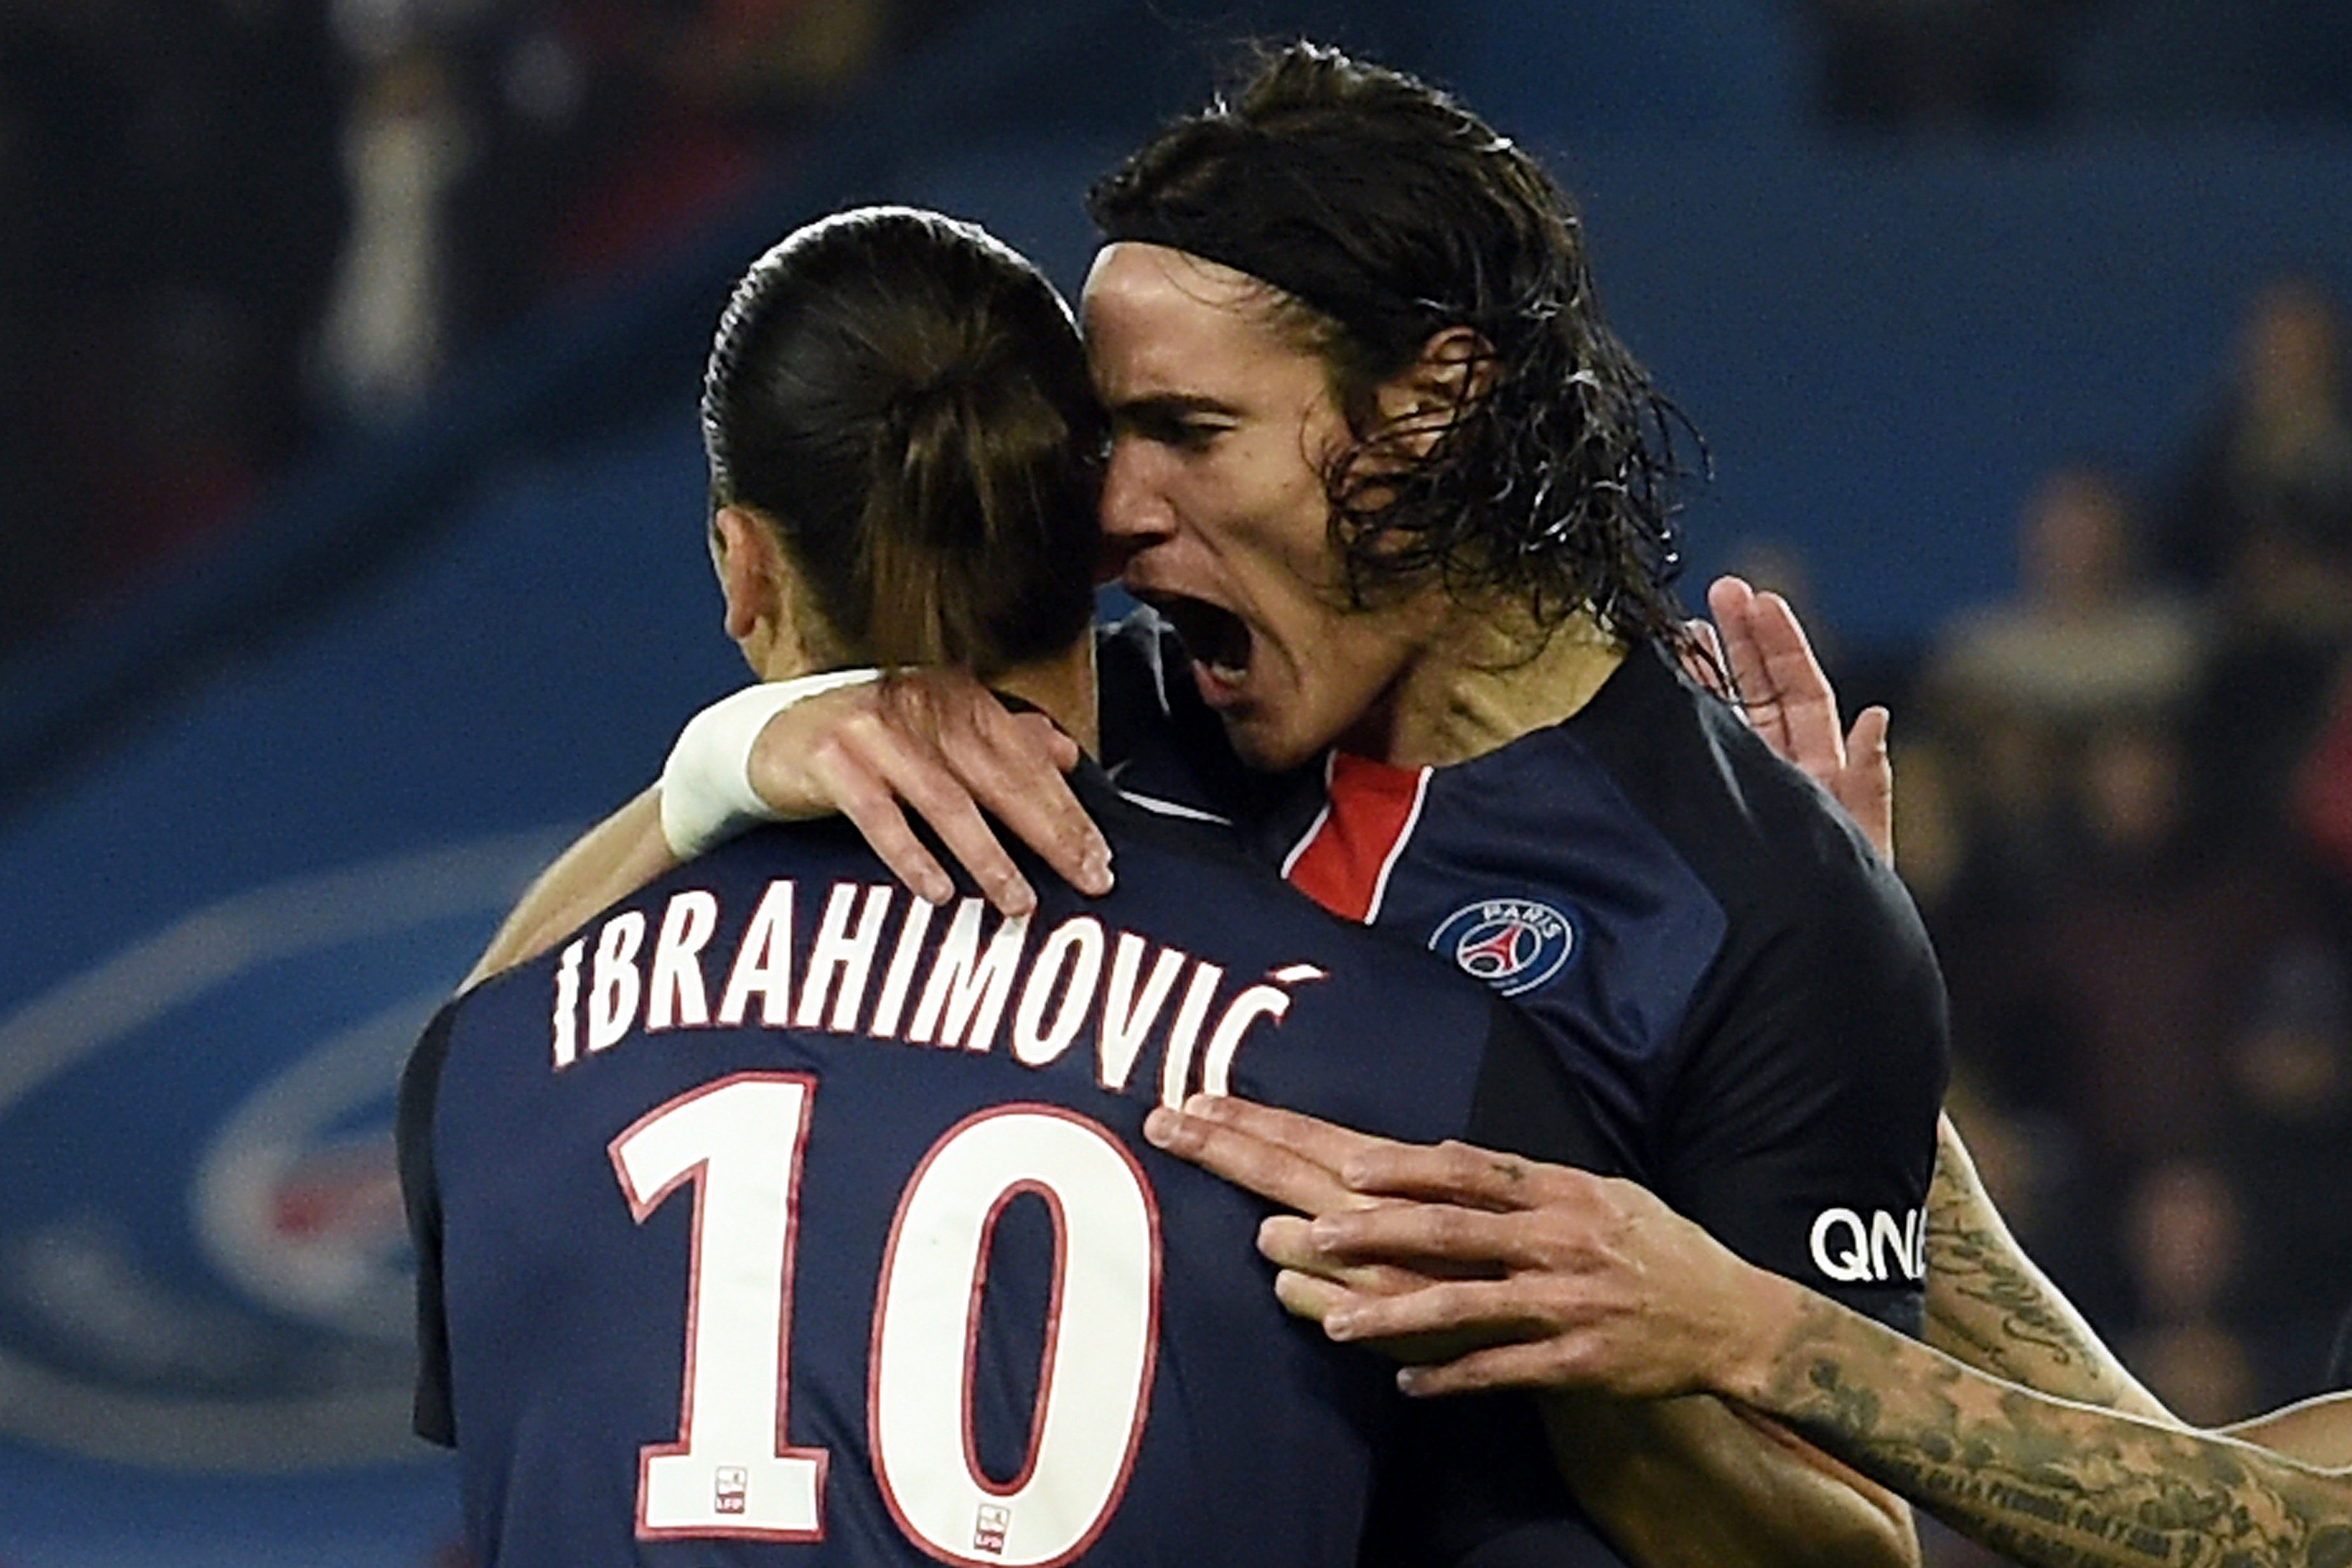 PSG will need their offensive firepower against Madrid Tuesday. (Getty)